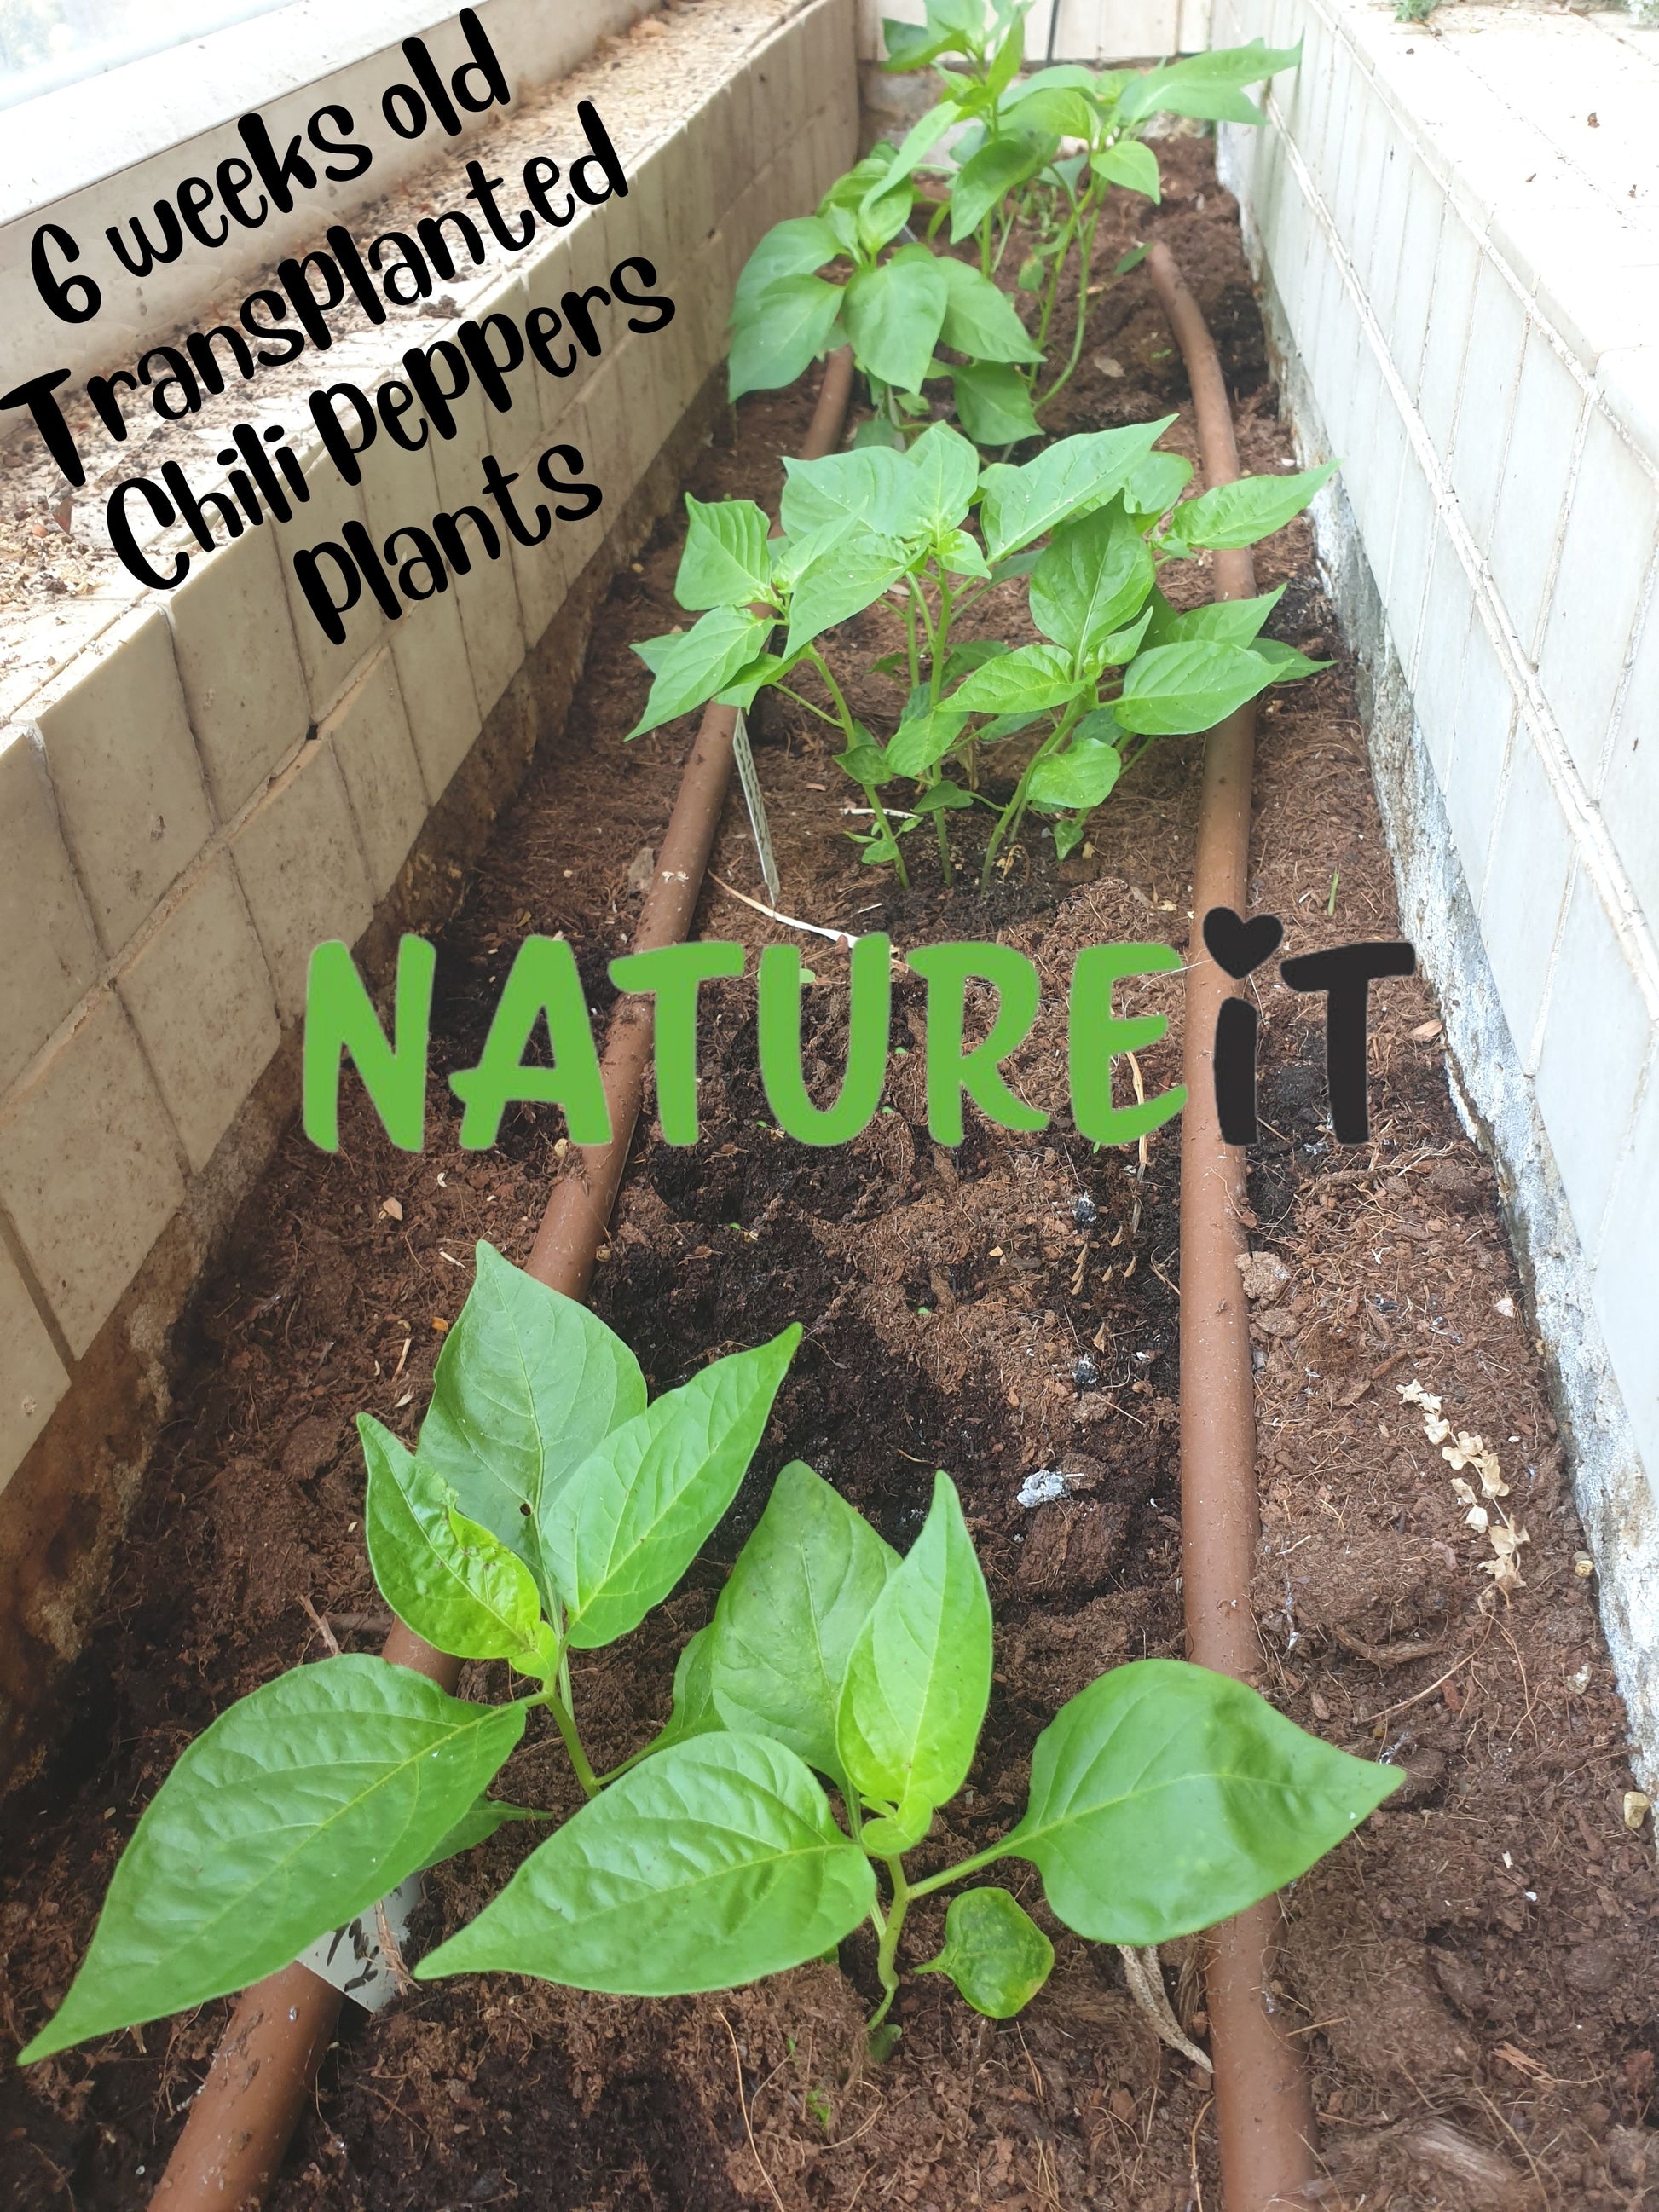 6 weeks old Chili pepper plants seedlings grown from seed using Natureit hot chili peppers seed starter kit